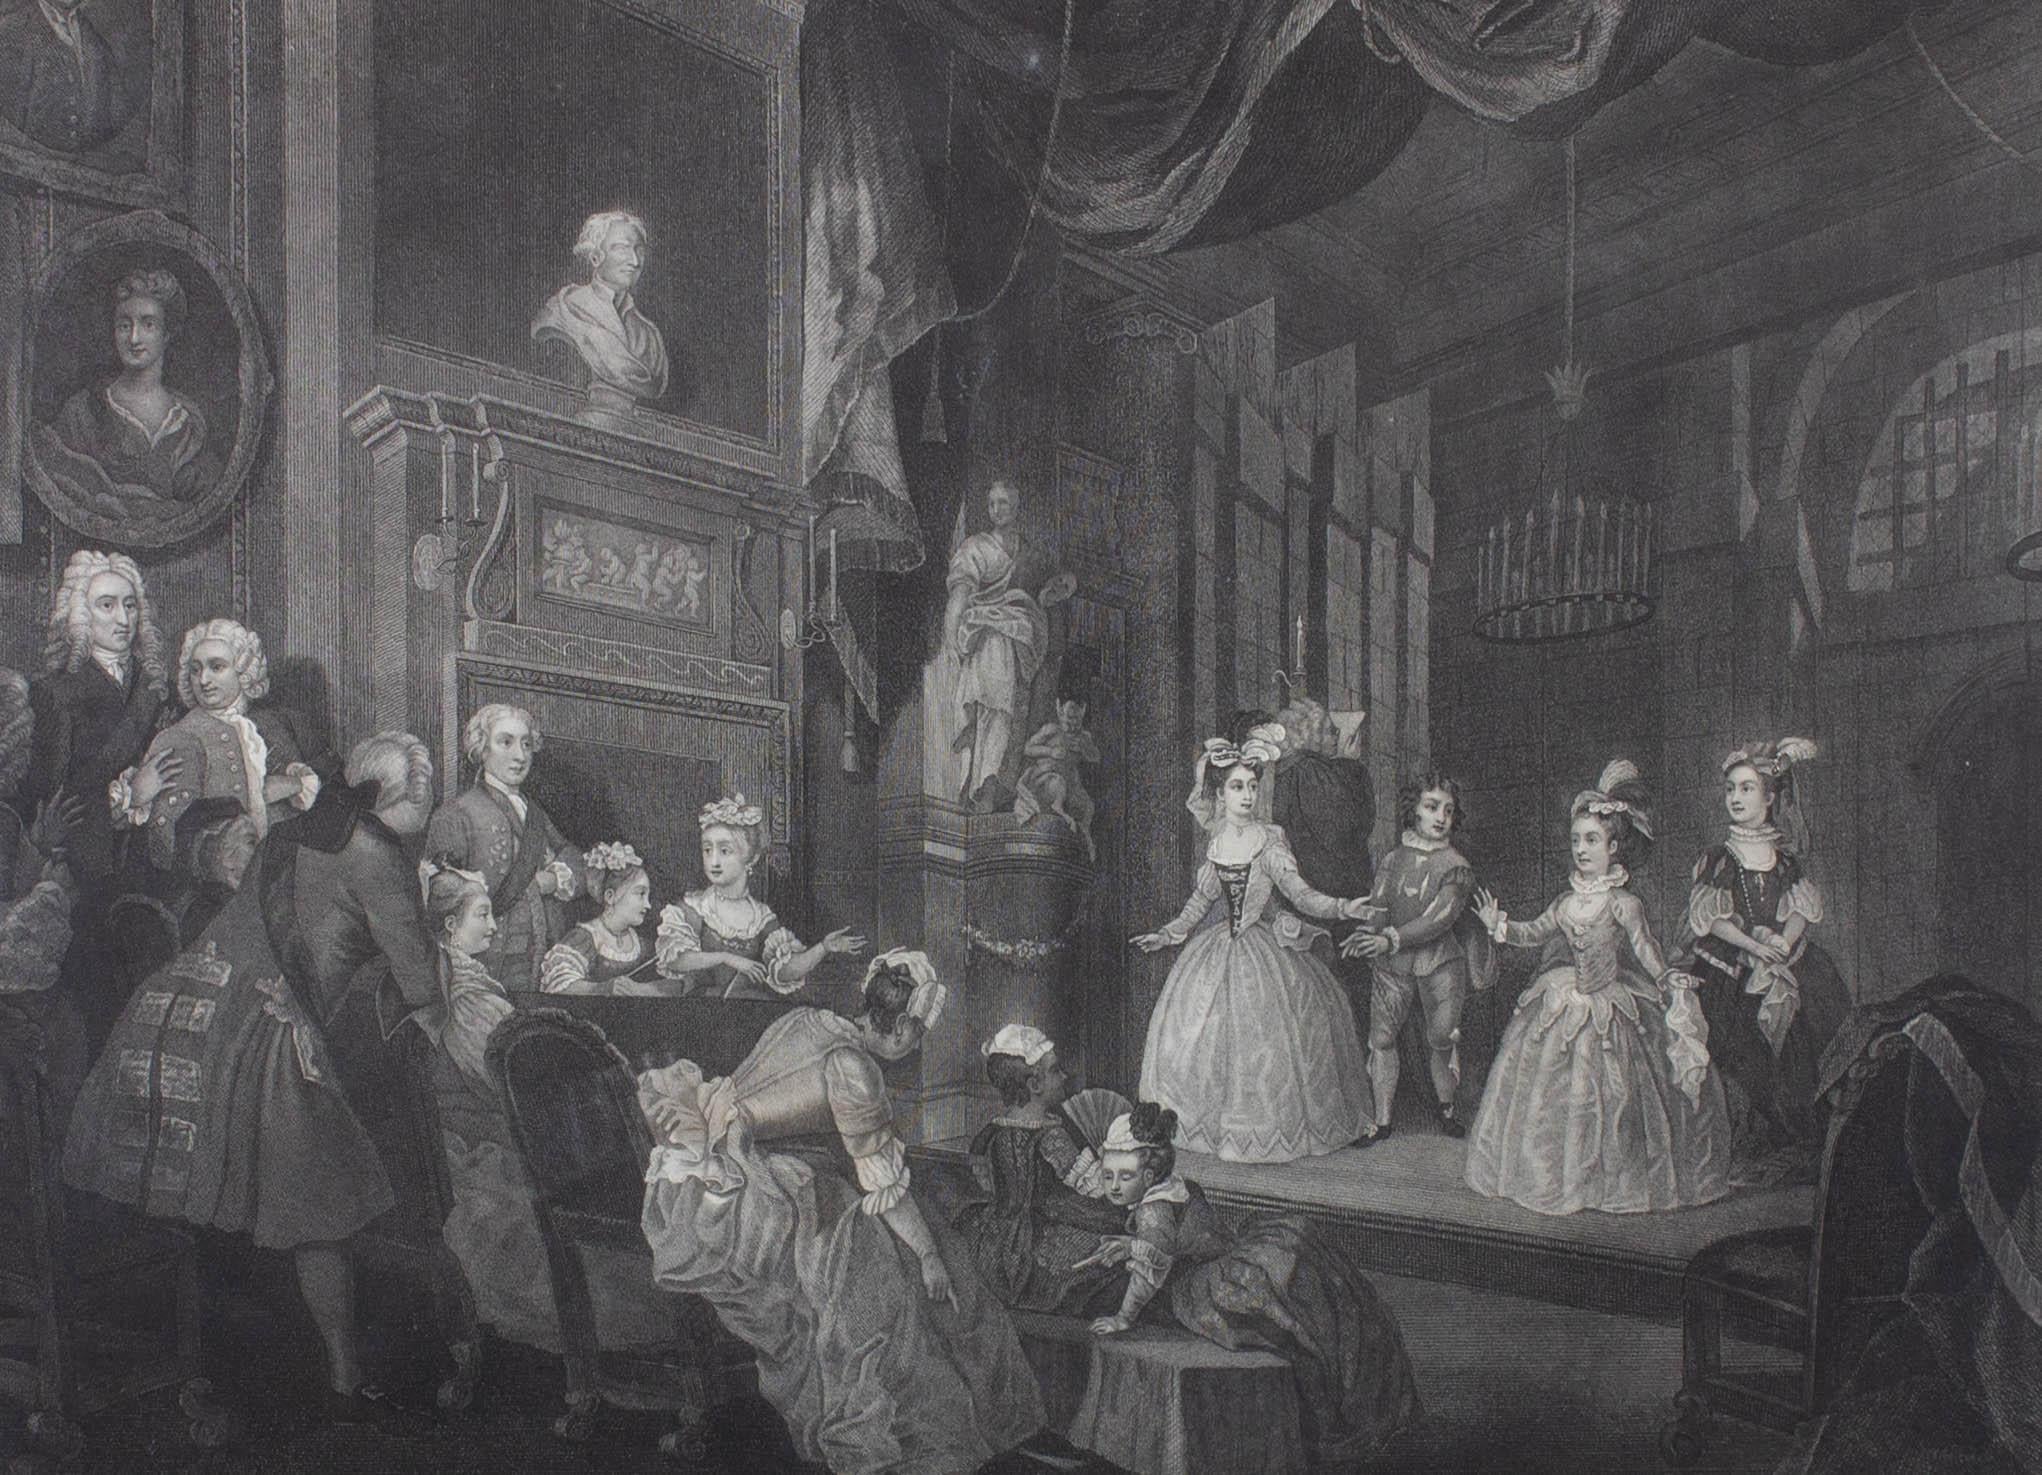 A late-18th or early-19th century strike of an engraving by Robert Dodd (1748-1815) after William Hogarth's (1697-1764) painting of a children's performance of John Dryden's play 'The Indian Emperor' (1665). First published in 1792. Likely a